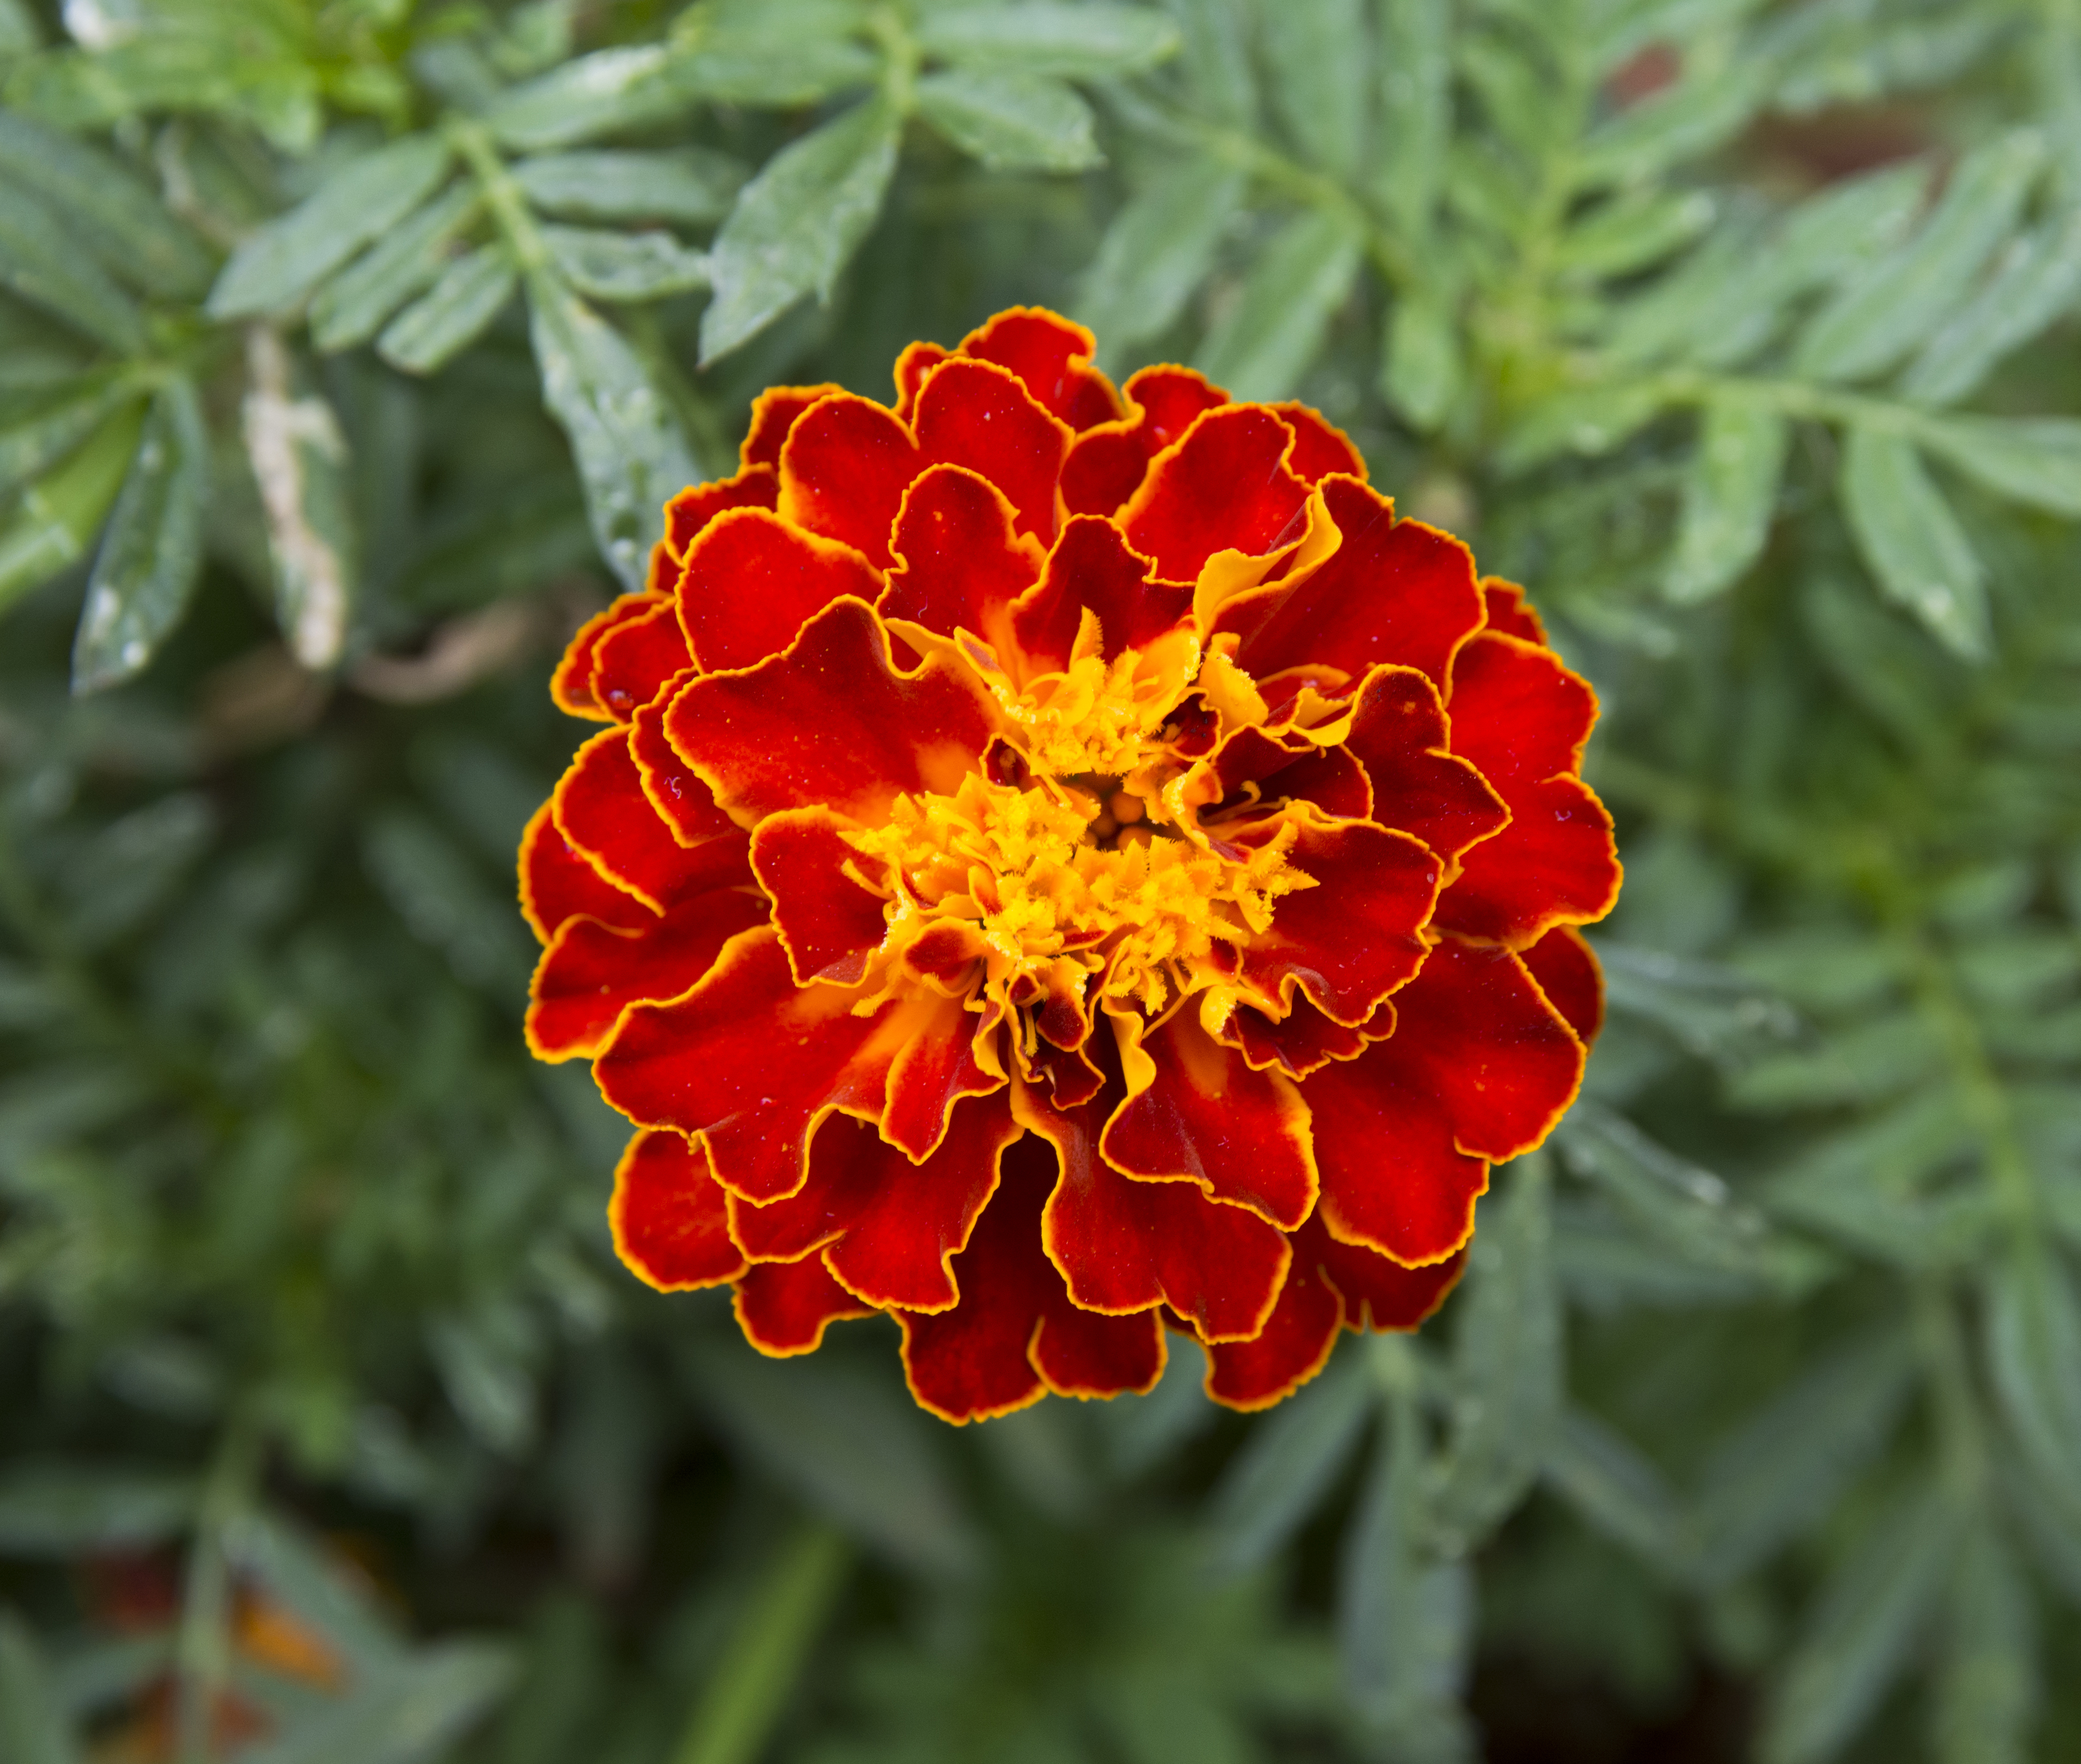 Tagetes sp. in Palermo